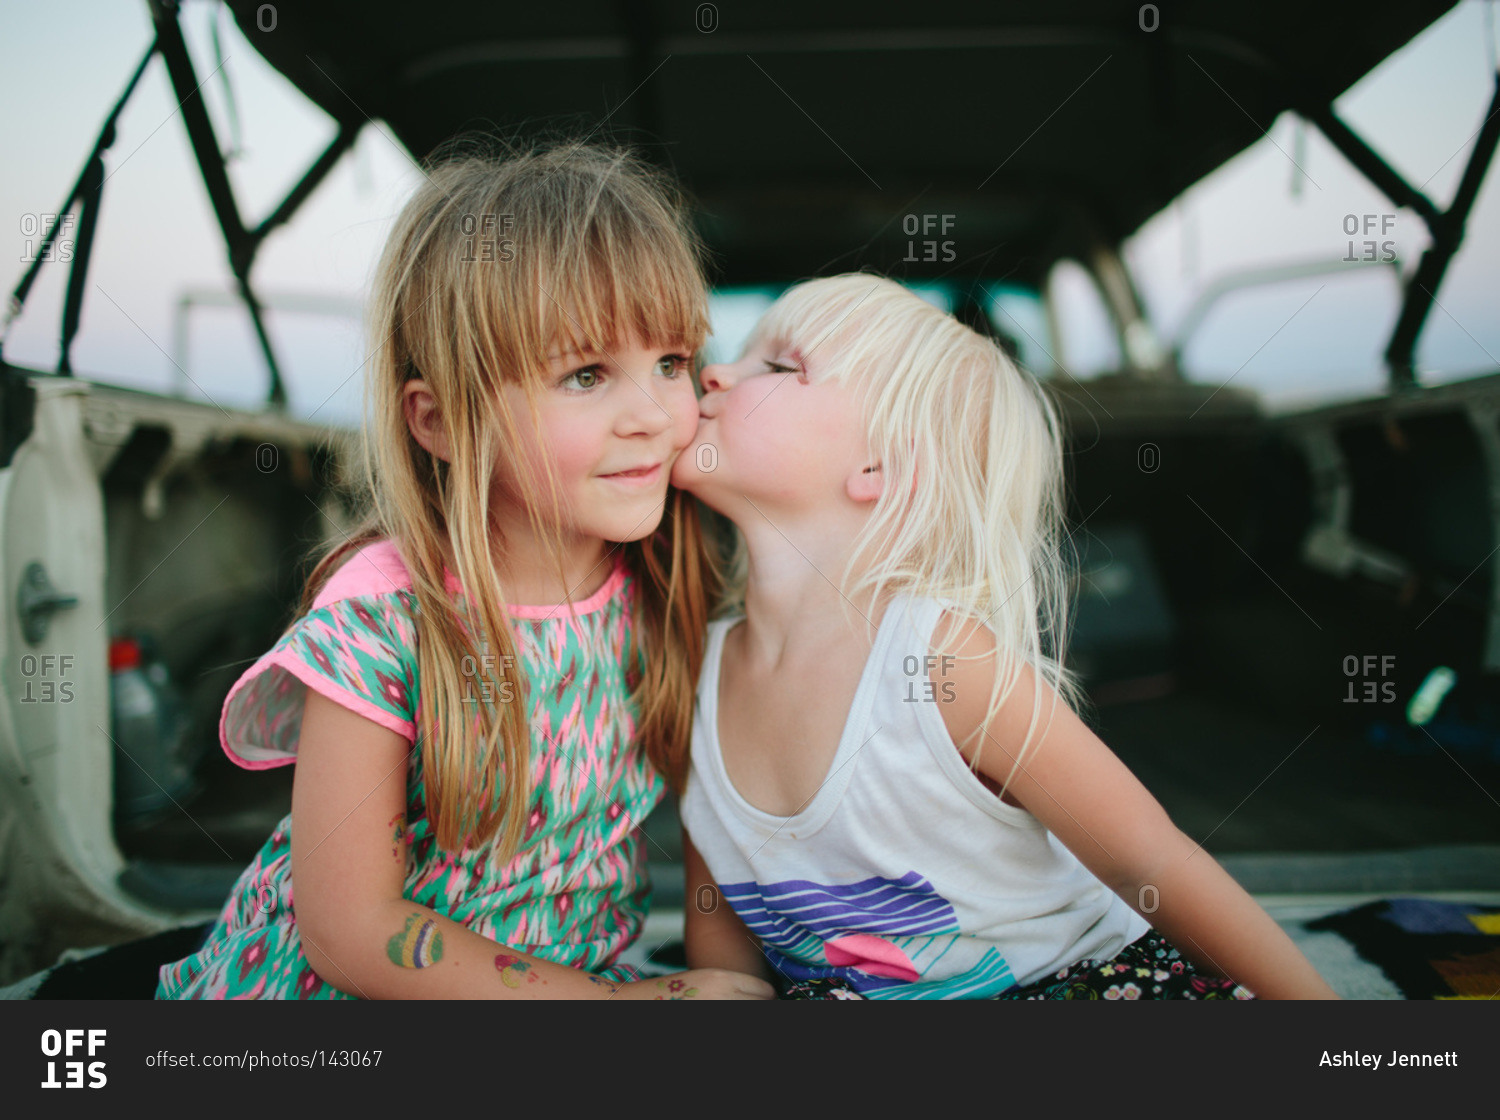 A girl kisses another girl by a truck